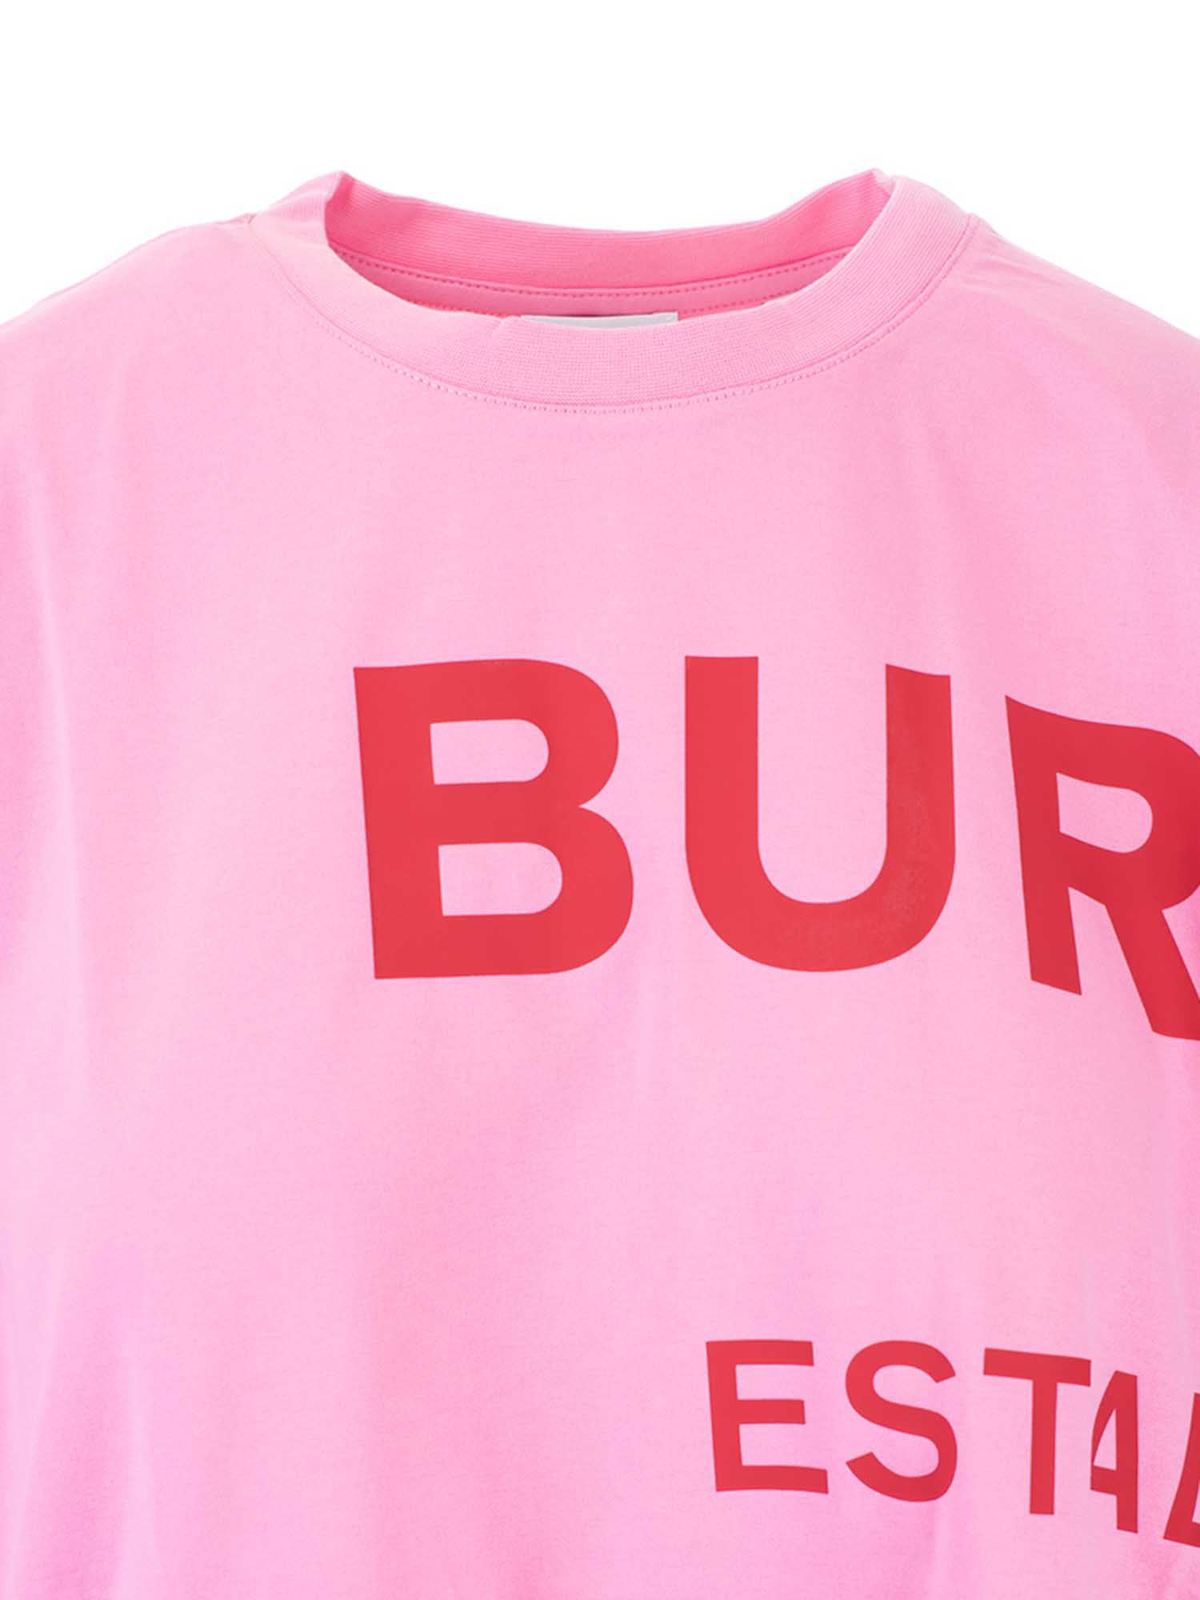 T-shirts Burberry - pink with red logo -